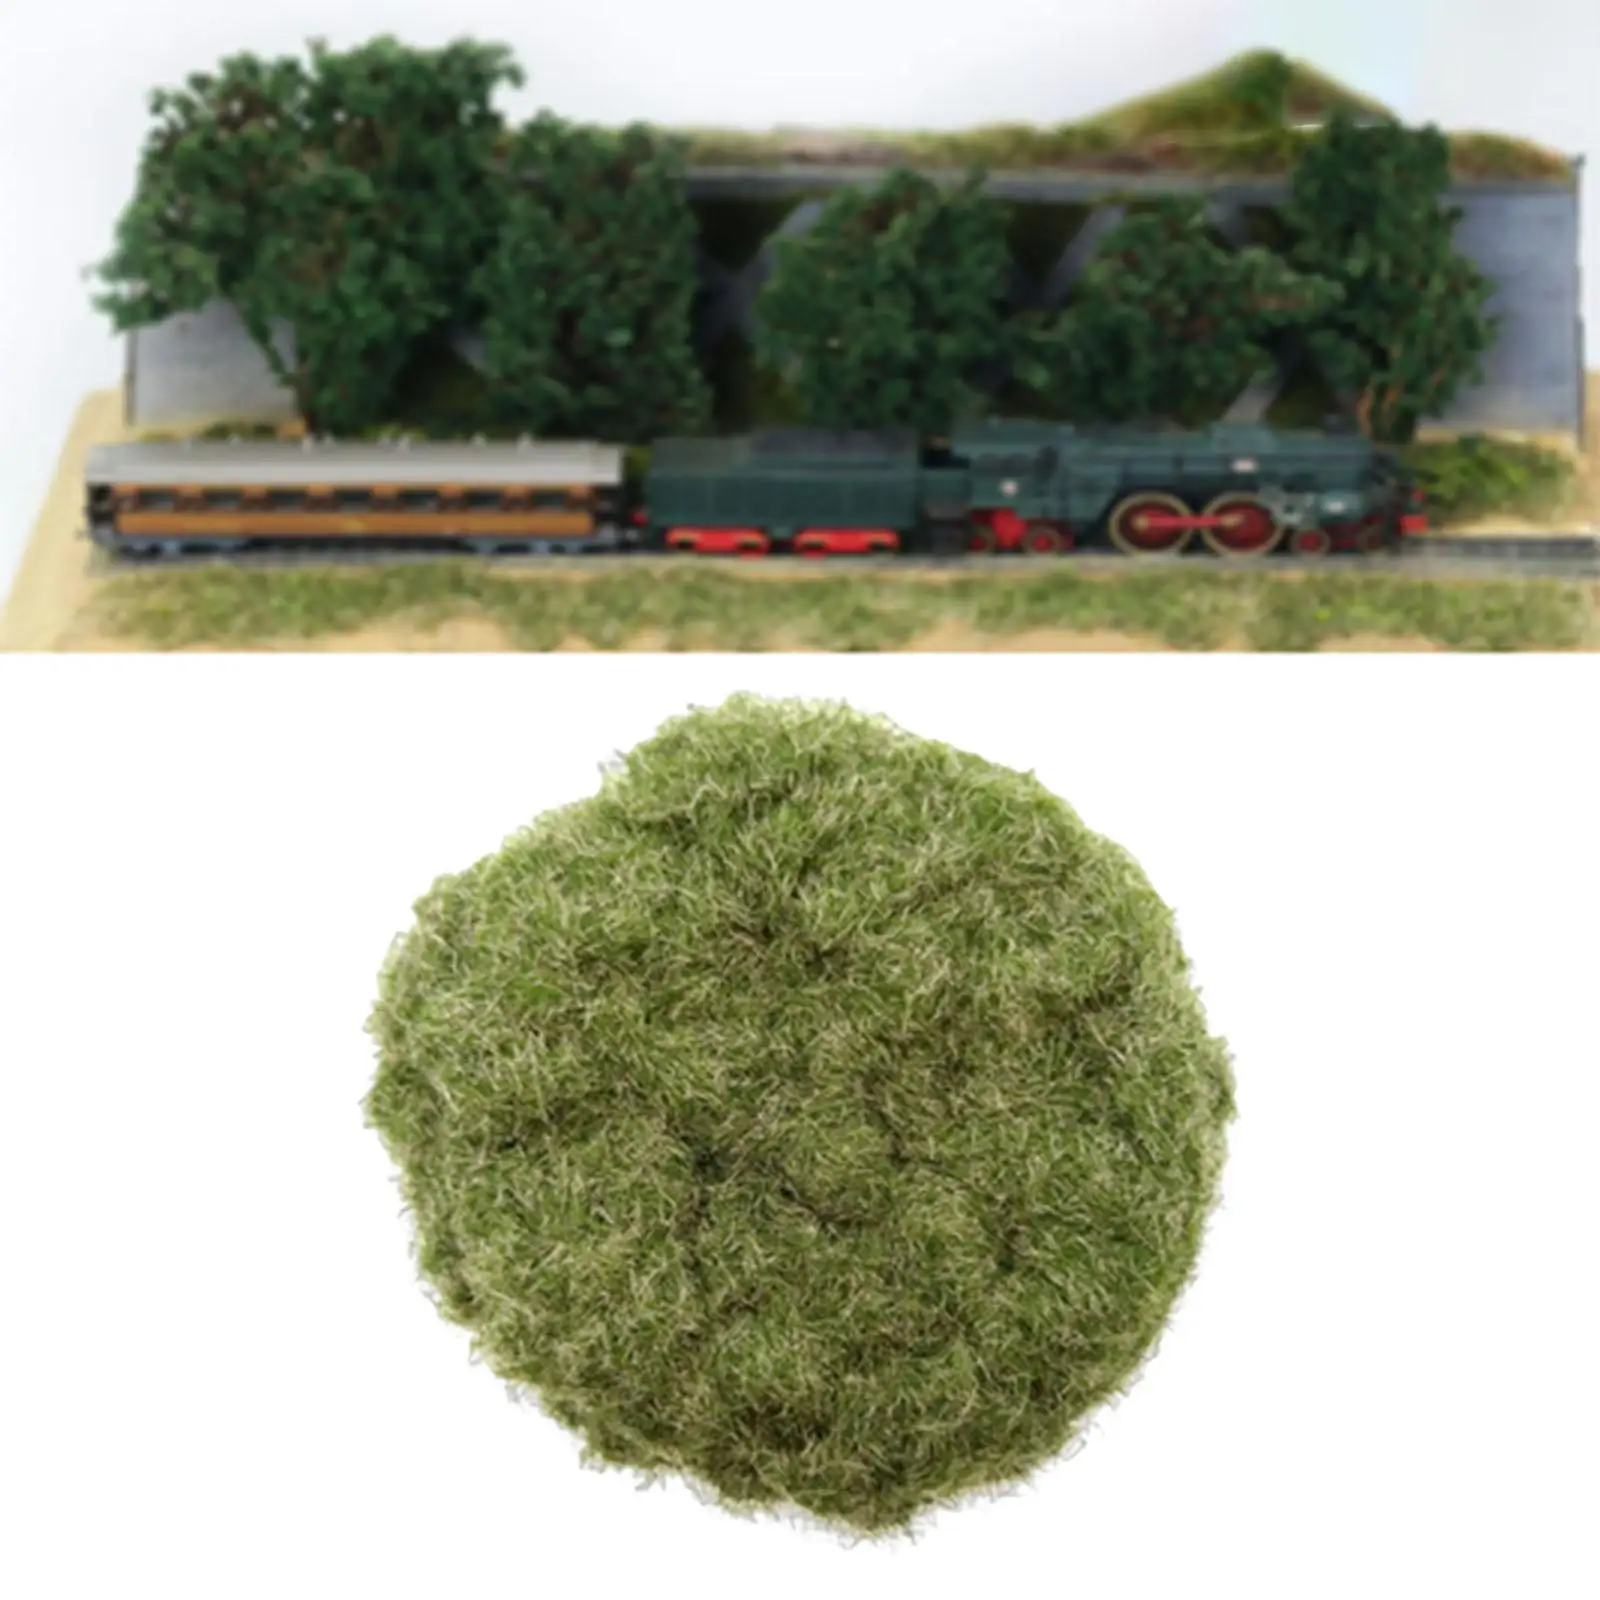 Artificial Grass Powder Miniature Model Micro Landscape Building Sand Table Scenery Railway Layout Craft DIY Static Grass 320ml